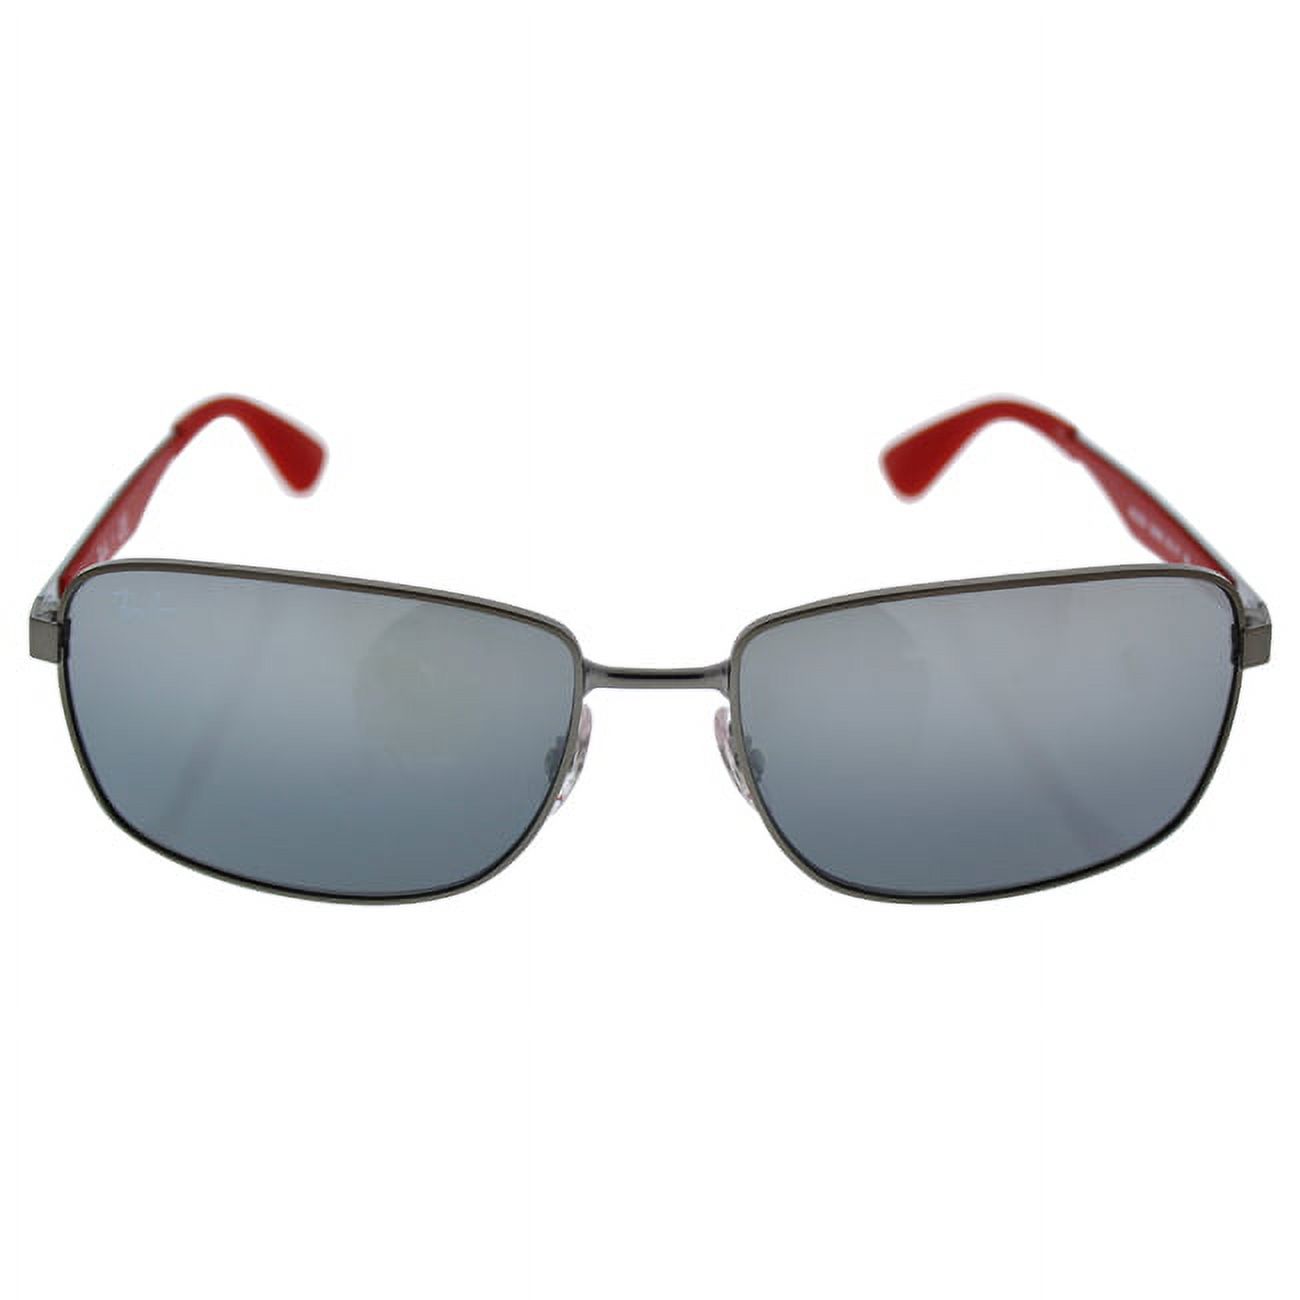 Ray Ban RB 3529 029/88 - Gunmetal/Grey Gradient by Ray Ban for Men - 61-17-145 mm Sunglasses - image 1 of 3